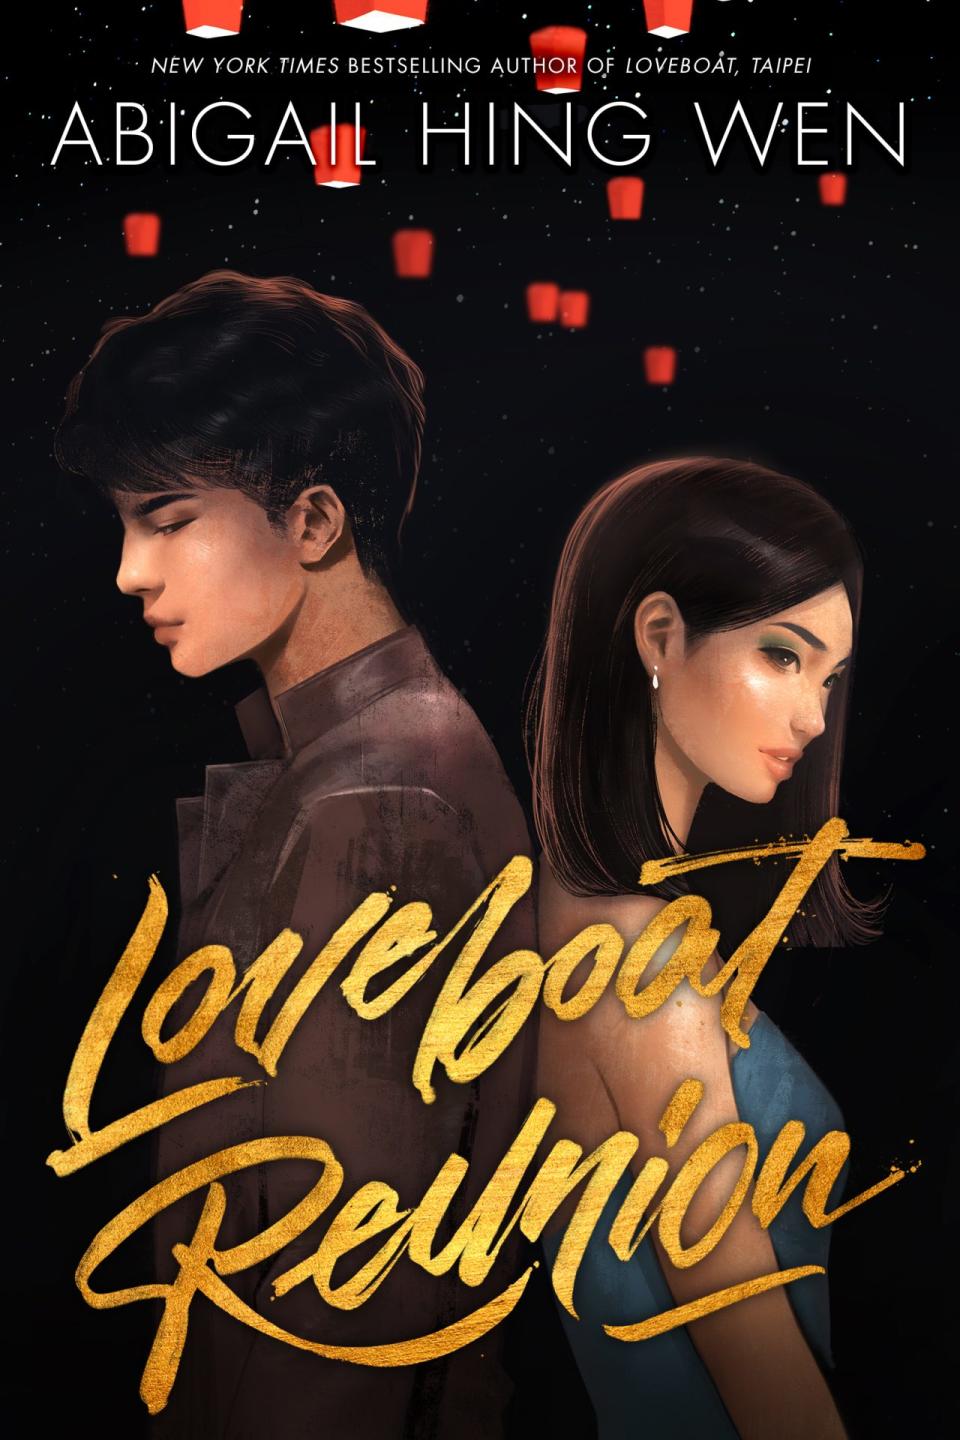 The painted cover of Loveboat Reunion shows a young Asian man and woman Xavier and Sophie backs to each other looking serious under them the title Loveboat Reunion